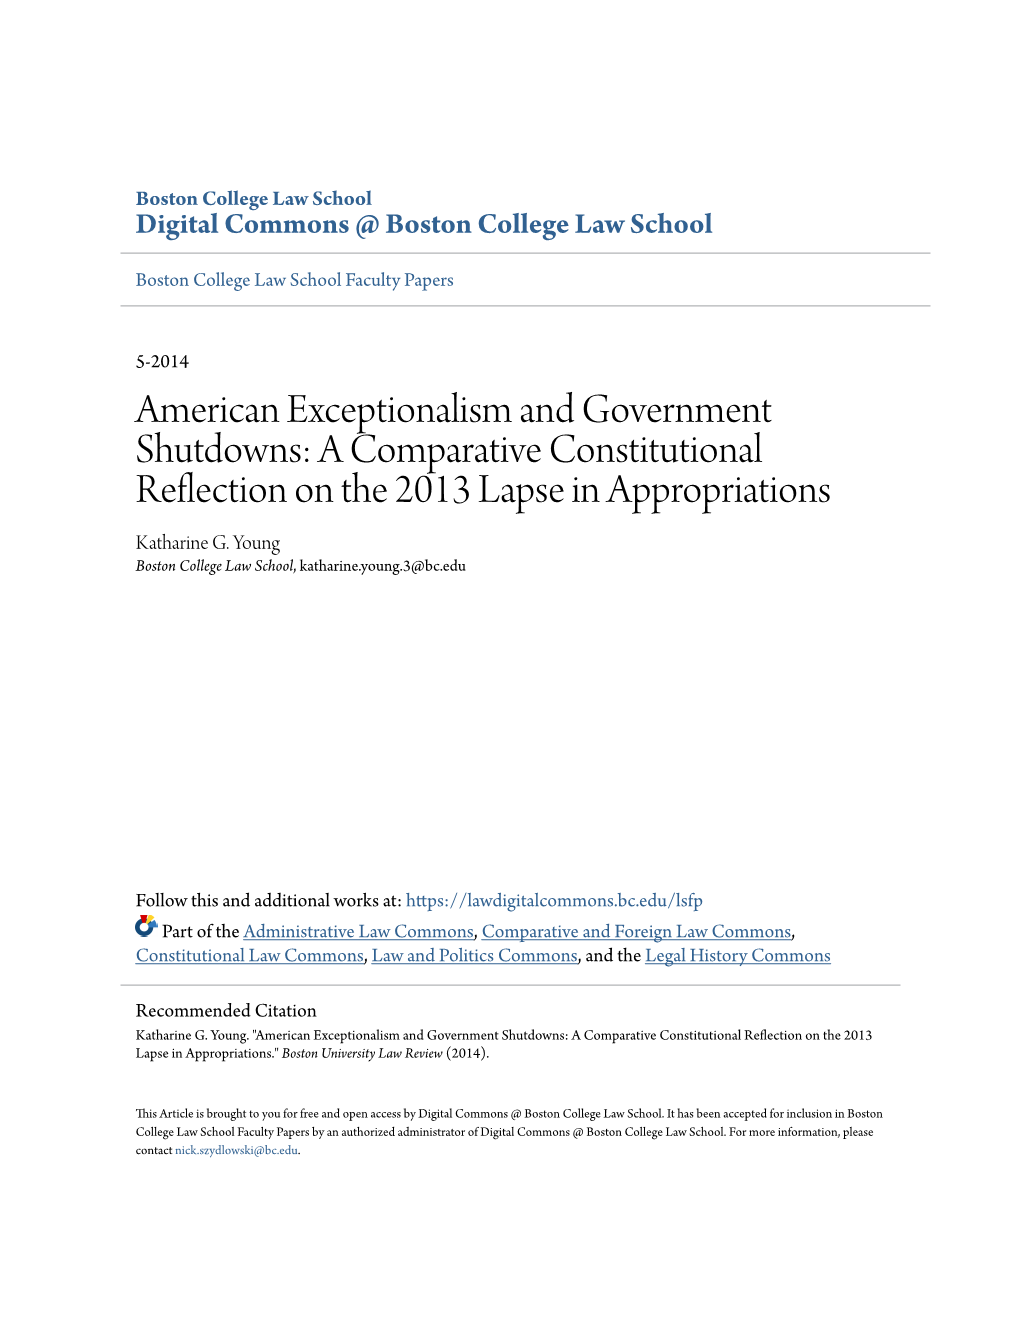 American Exceptionalism and Government Shutdowns: a Comparative Constitutional Reflection on the 2013 Lapse in Appropriations Katharine G